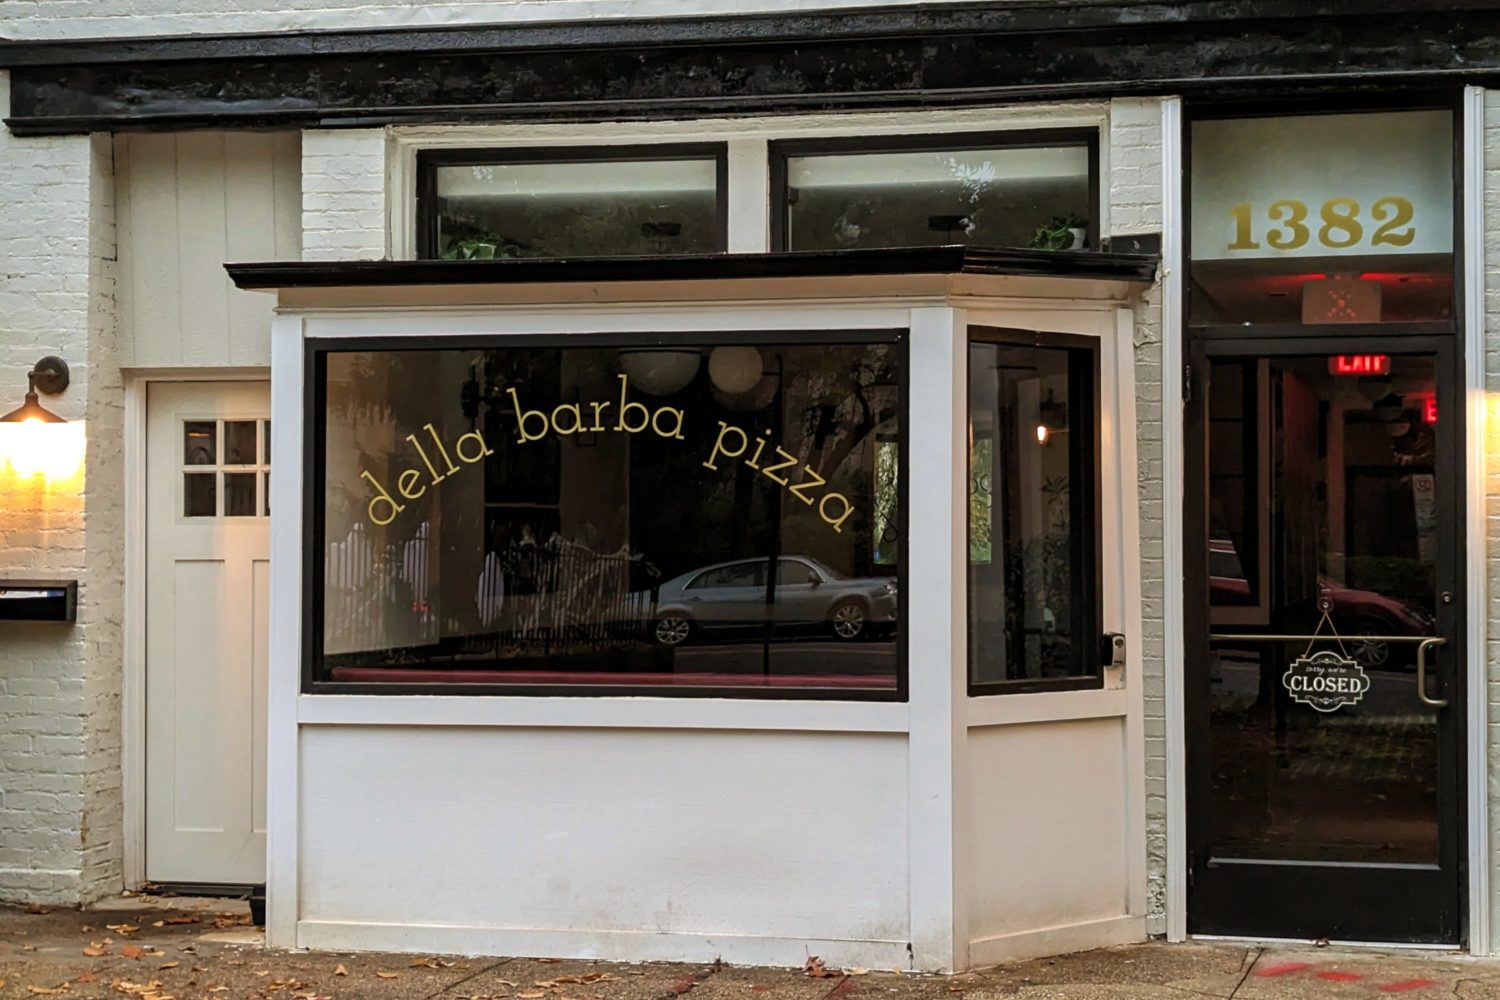 The storefront of Capitol Hill's new pizza shop.